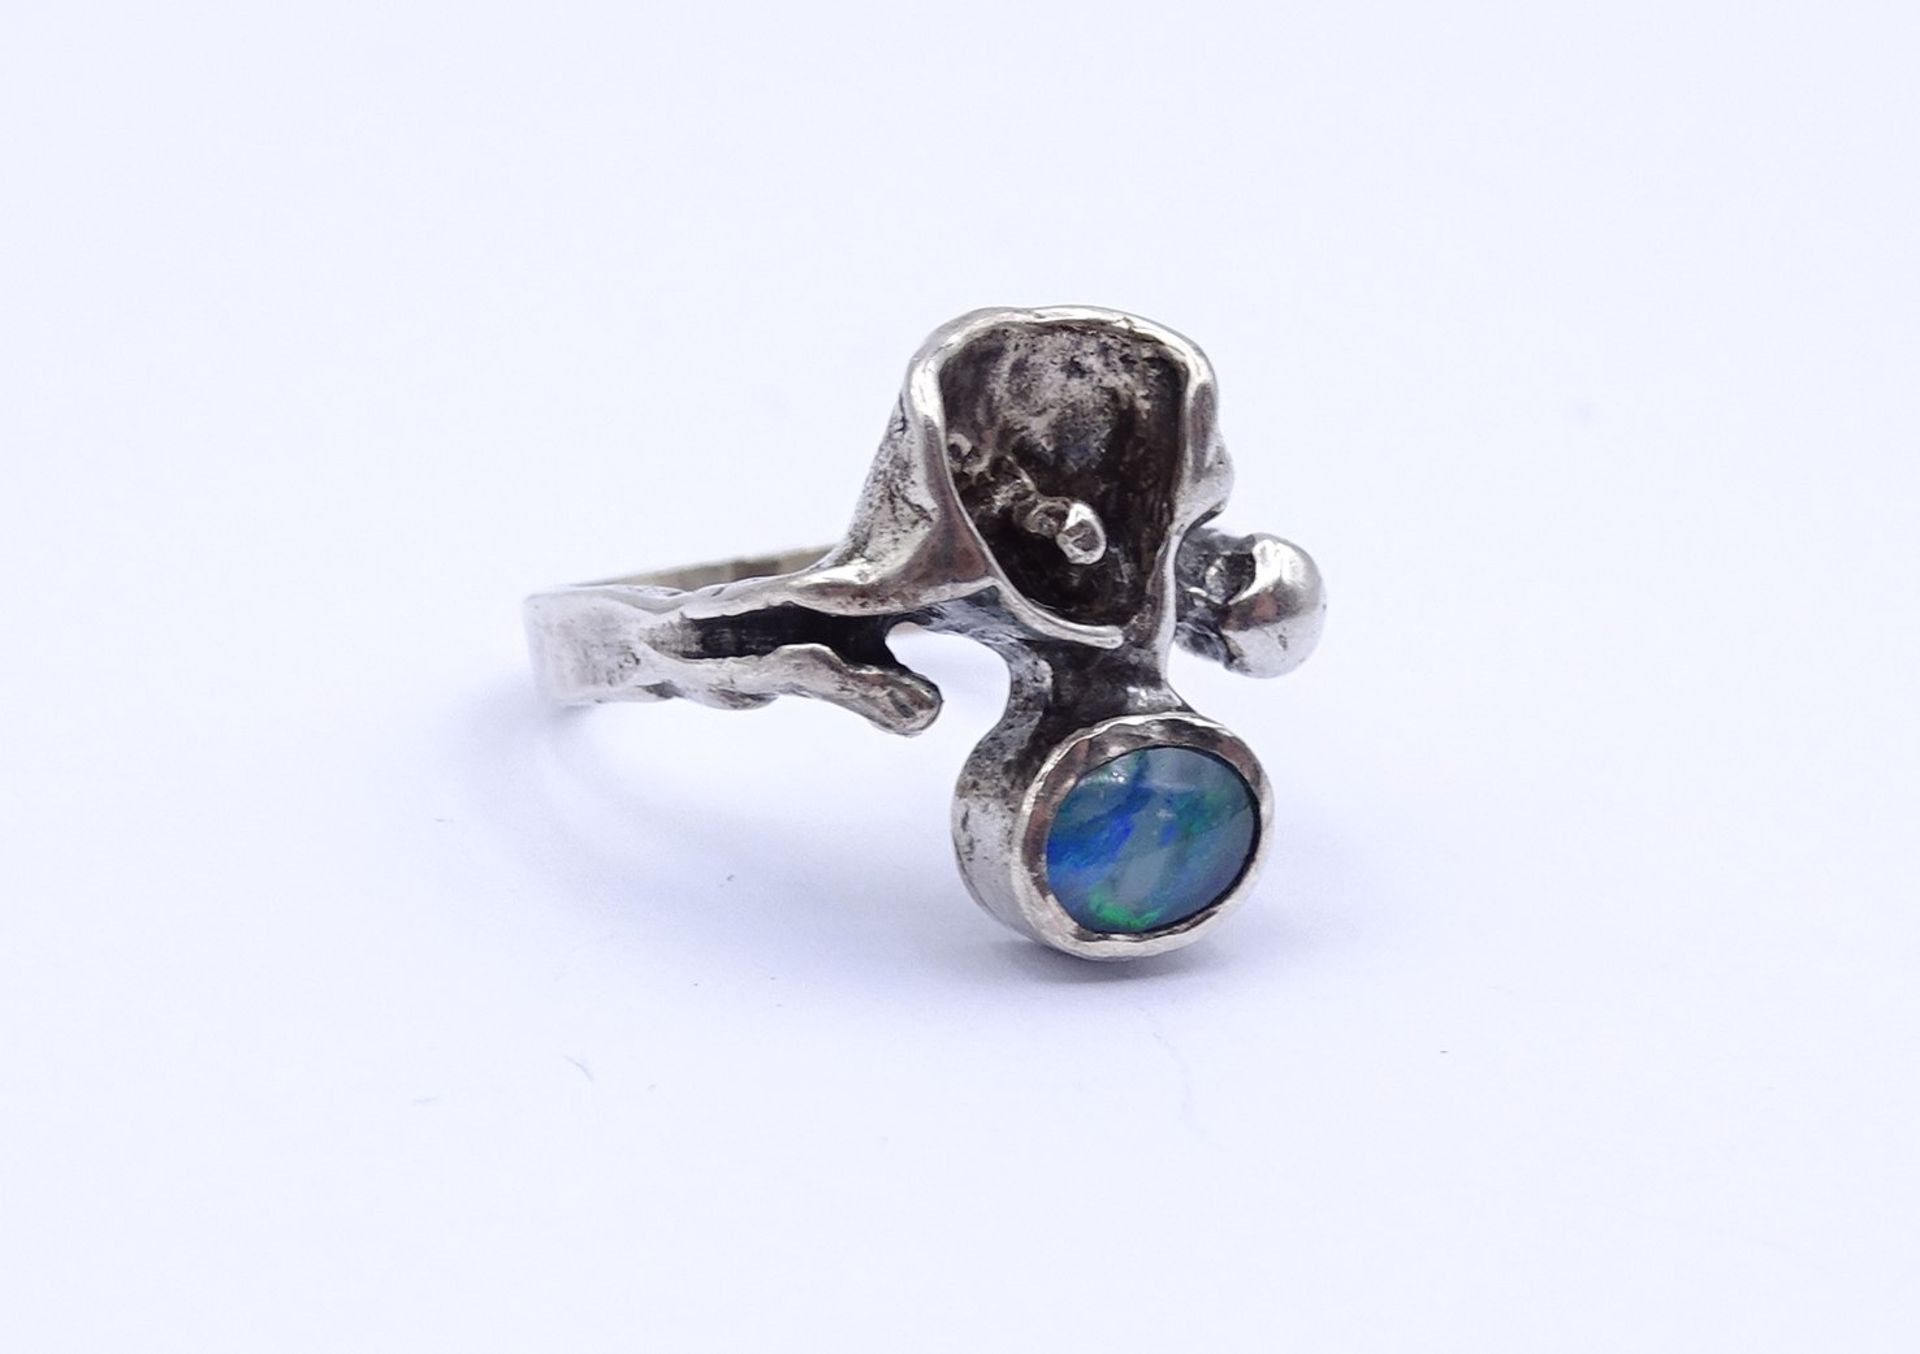 Ring mit Opal, Silber 835/000, 5,1g. RG 53 - Image 2 of 3